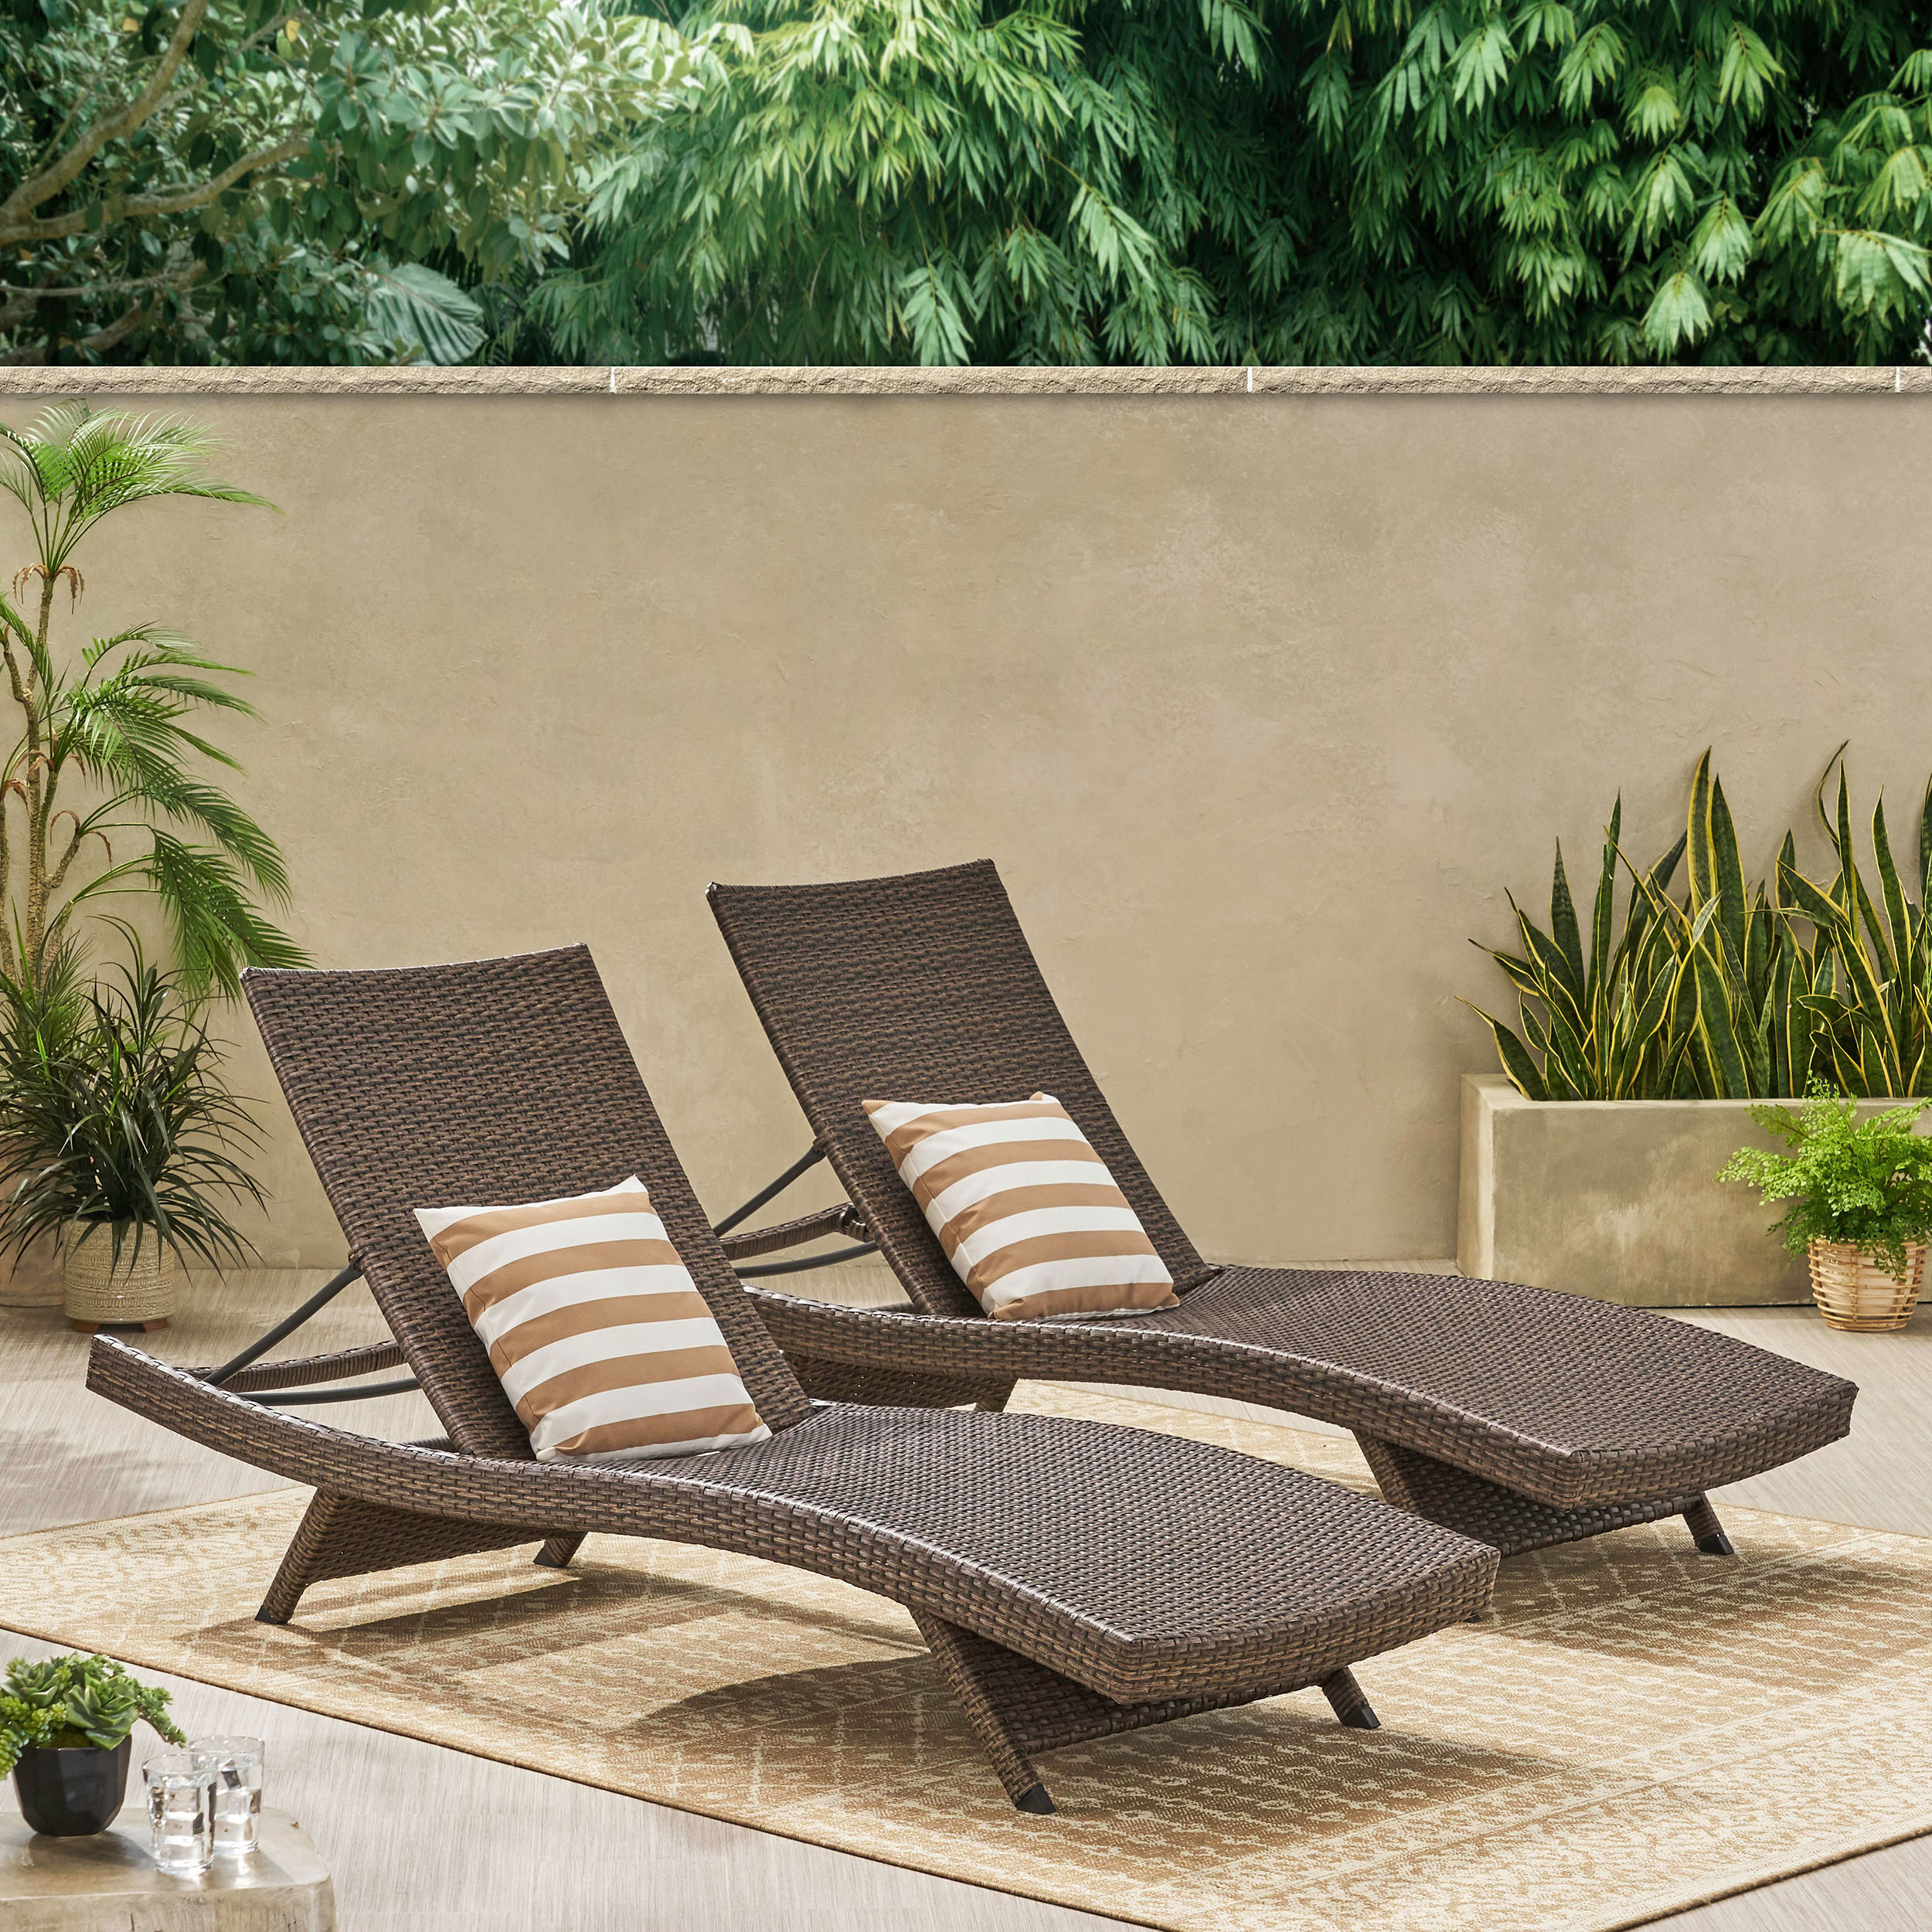 Thelma Outdoor Aluminum Wicker Chaise Lounge, Set of 2, Mixed Mocha - image 4 of 11